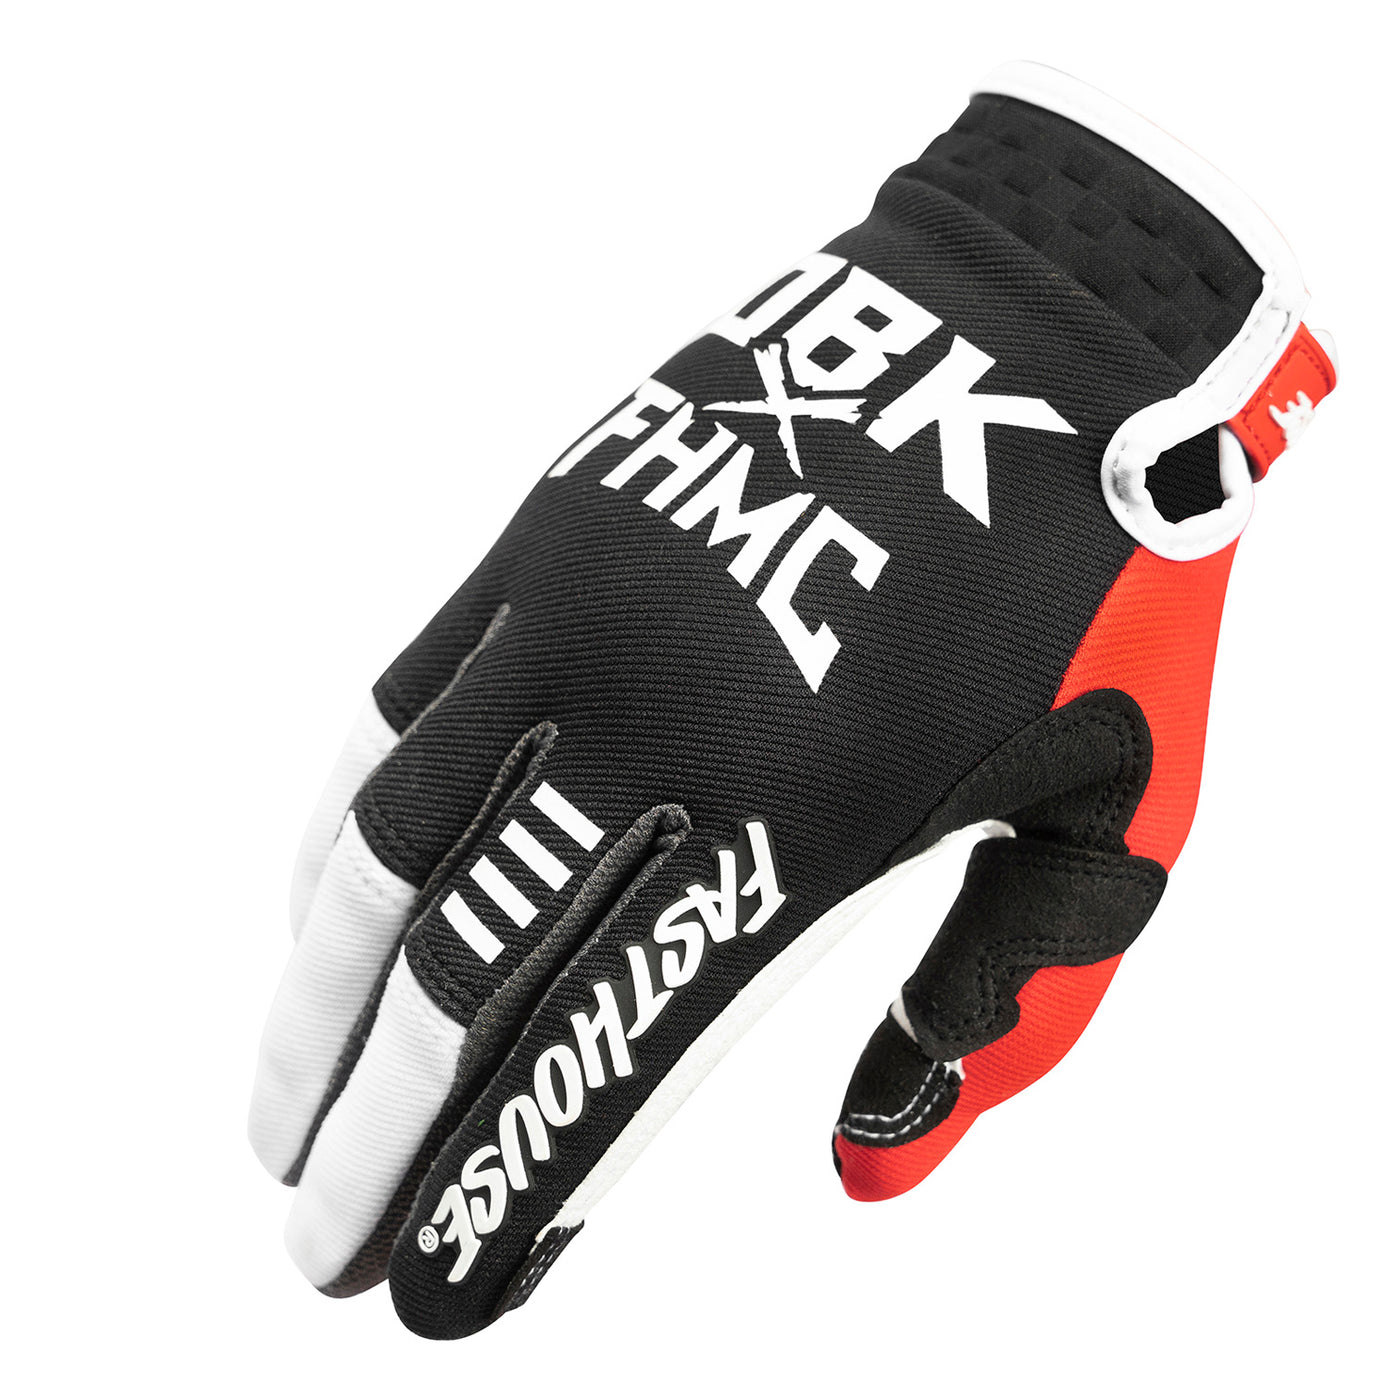 Fasthouse Youth Speed Style Twitch Glove